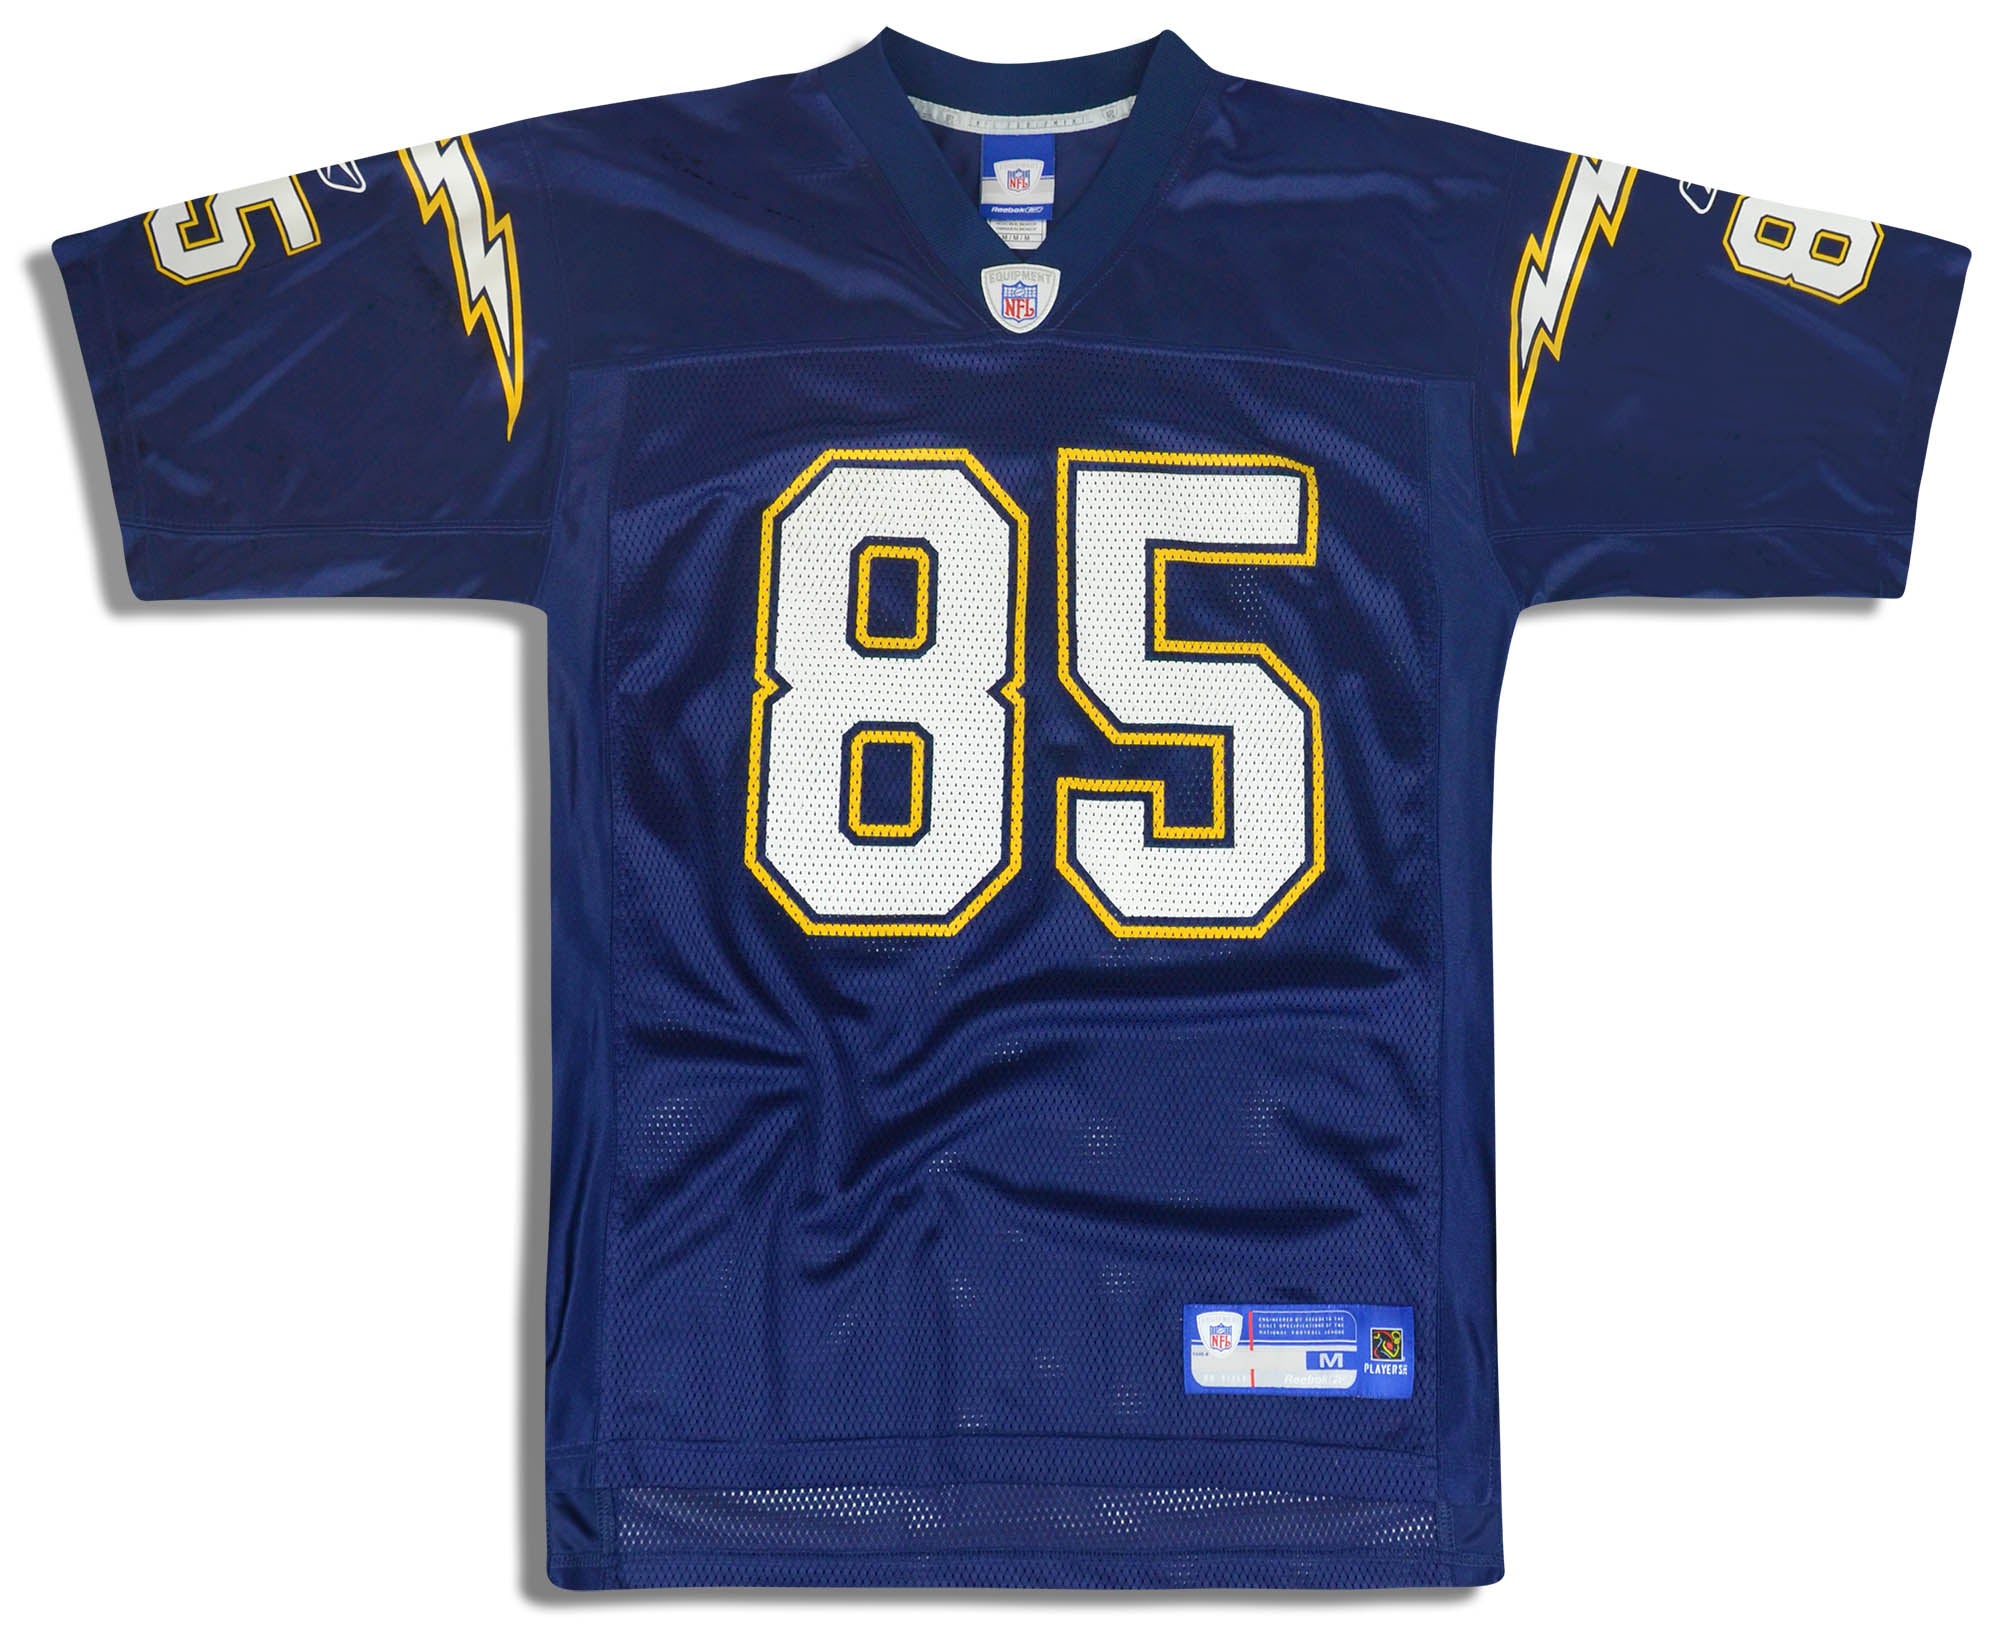 2005-06 SAN DIEGO CHARGERS GATES #85 REEBOK ON FIELD JERSEY (HOME) M